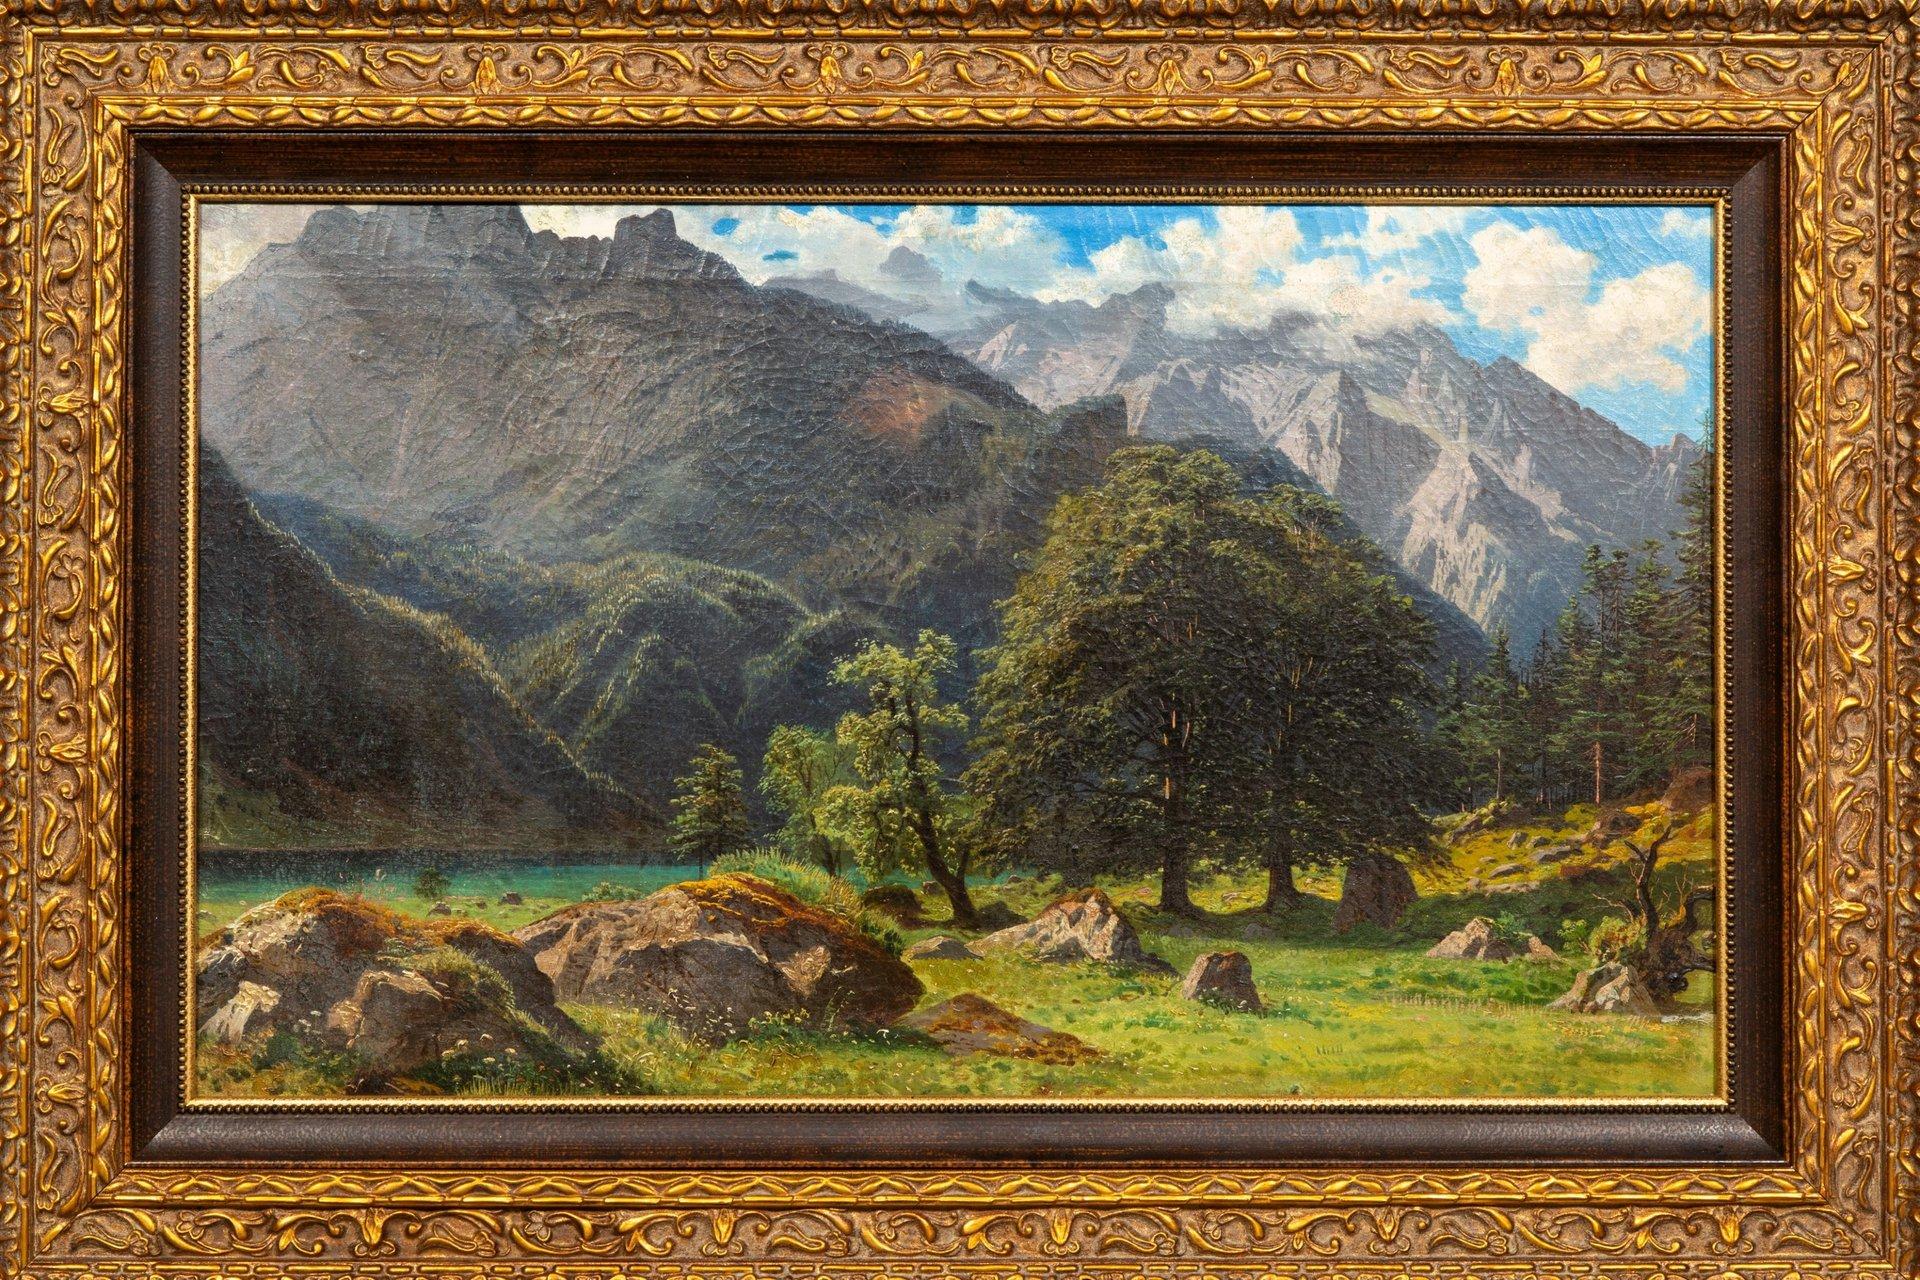 Obersee by François Roffiaen (1820-1898) Oil on canvas For Sale 10